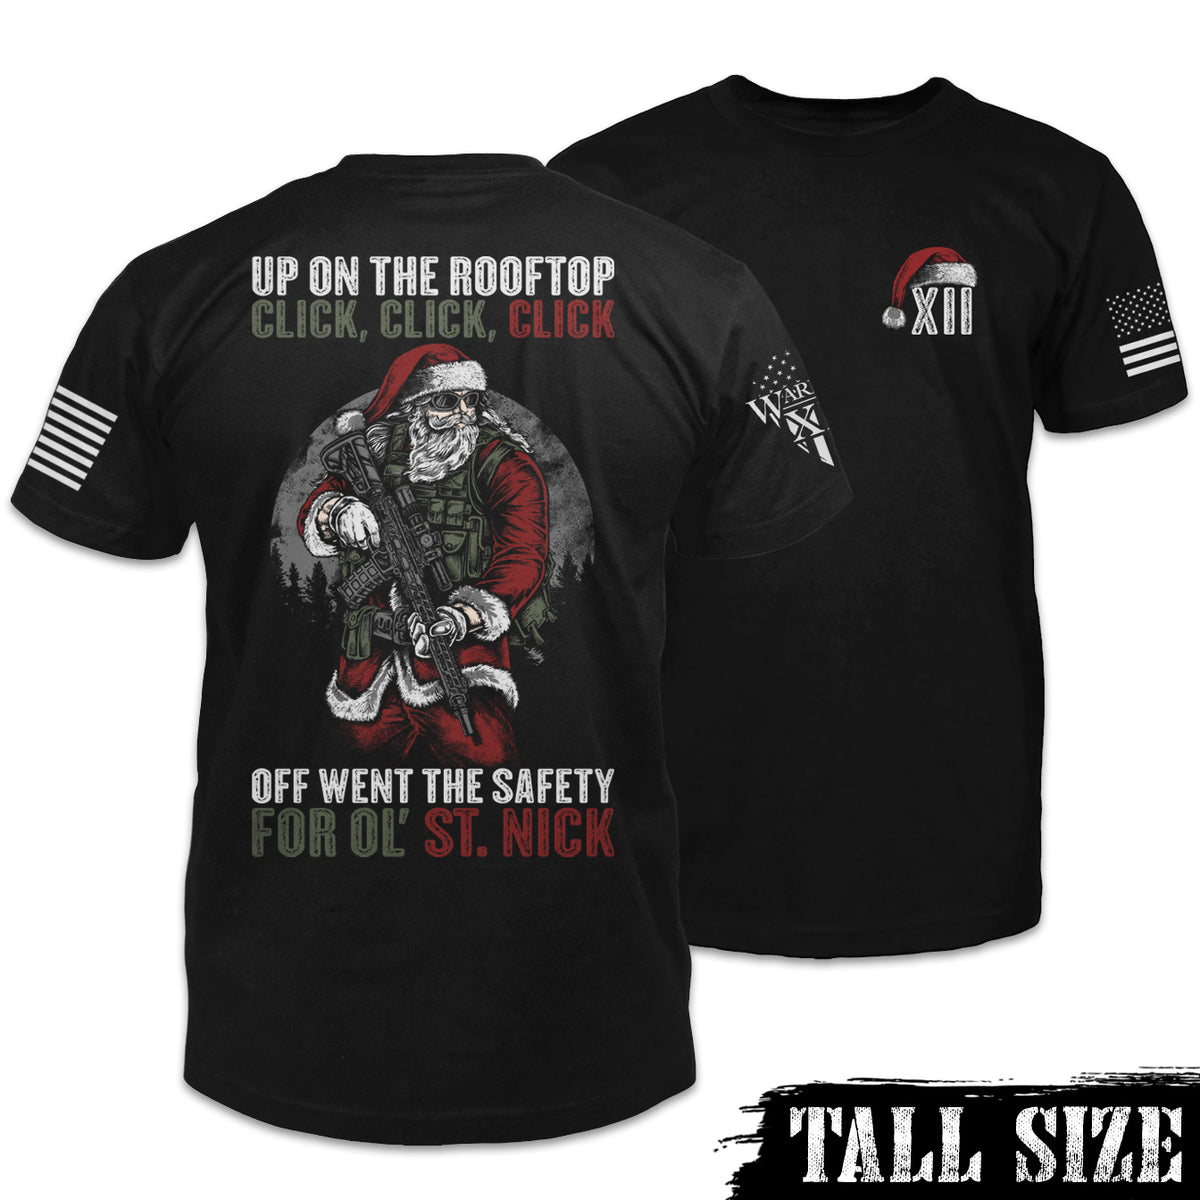 Front and back black tall size shirt with the words "Up on the rooftop, click, click, click. Off went the safety for ol' St. Nick" with Santa holding a gun printed on the shirt.